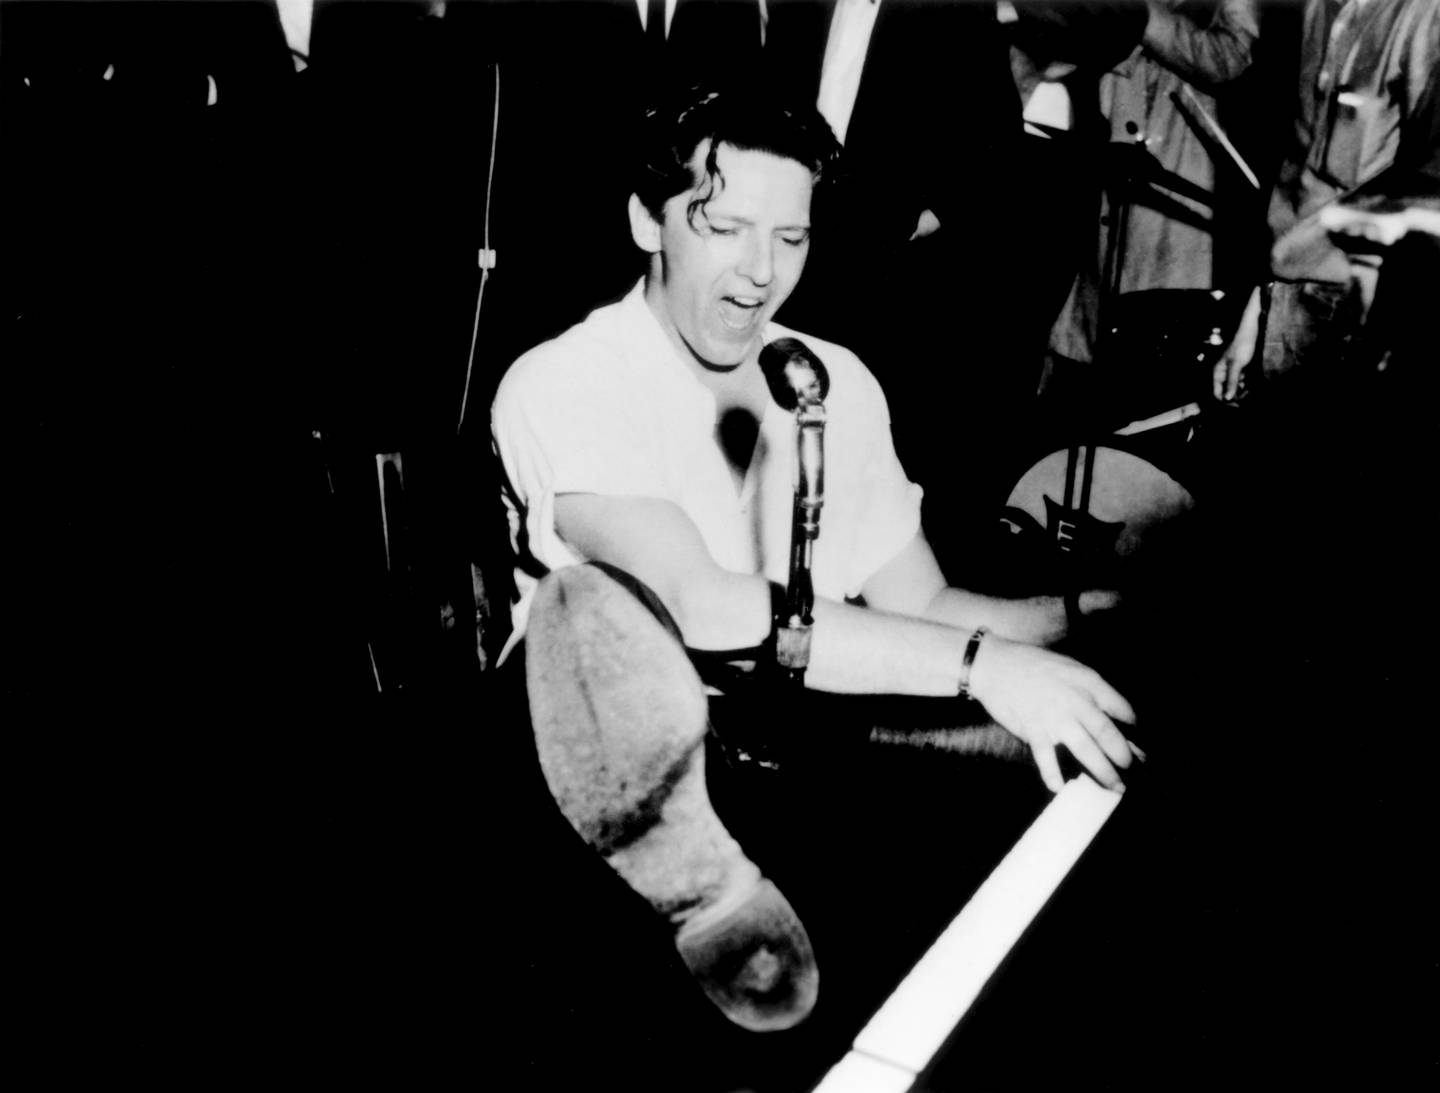 American singer musician Jerry Lee Lewis. Photo / Supplied 